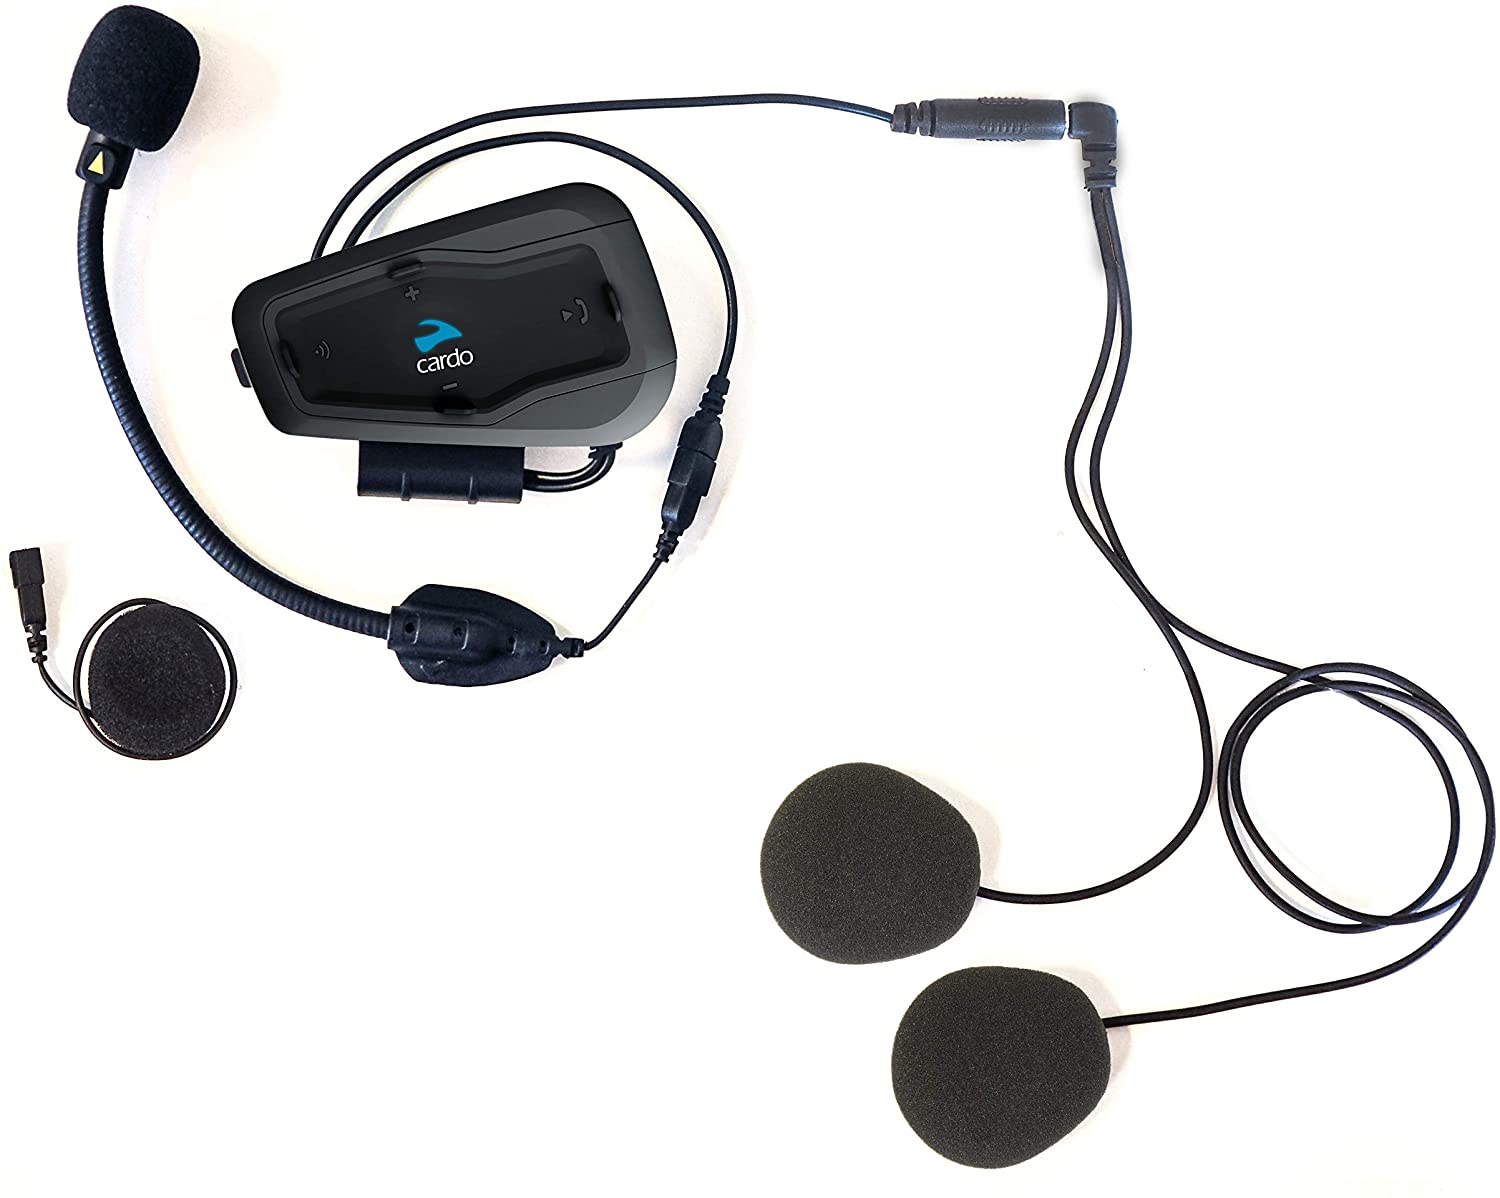 Review of Cardo FREECOM 1 PLUS-Motorcycle 2-Way Bluetooth Communication System